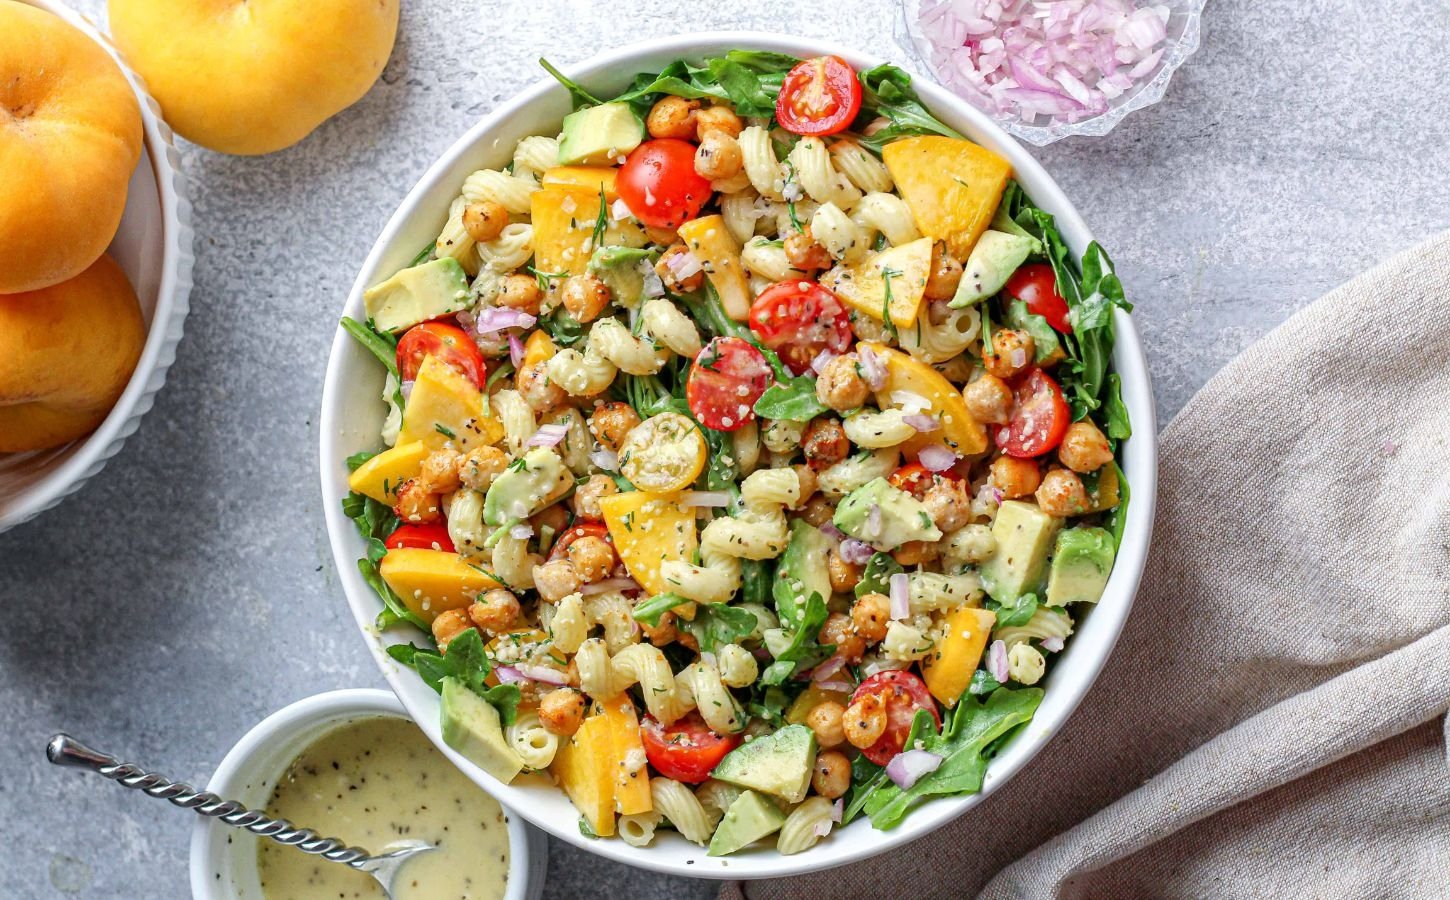 a peach and arugula pasta salad with tomato, peach, and other plant-based ingredients